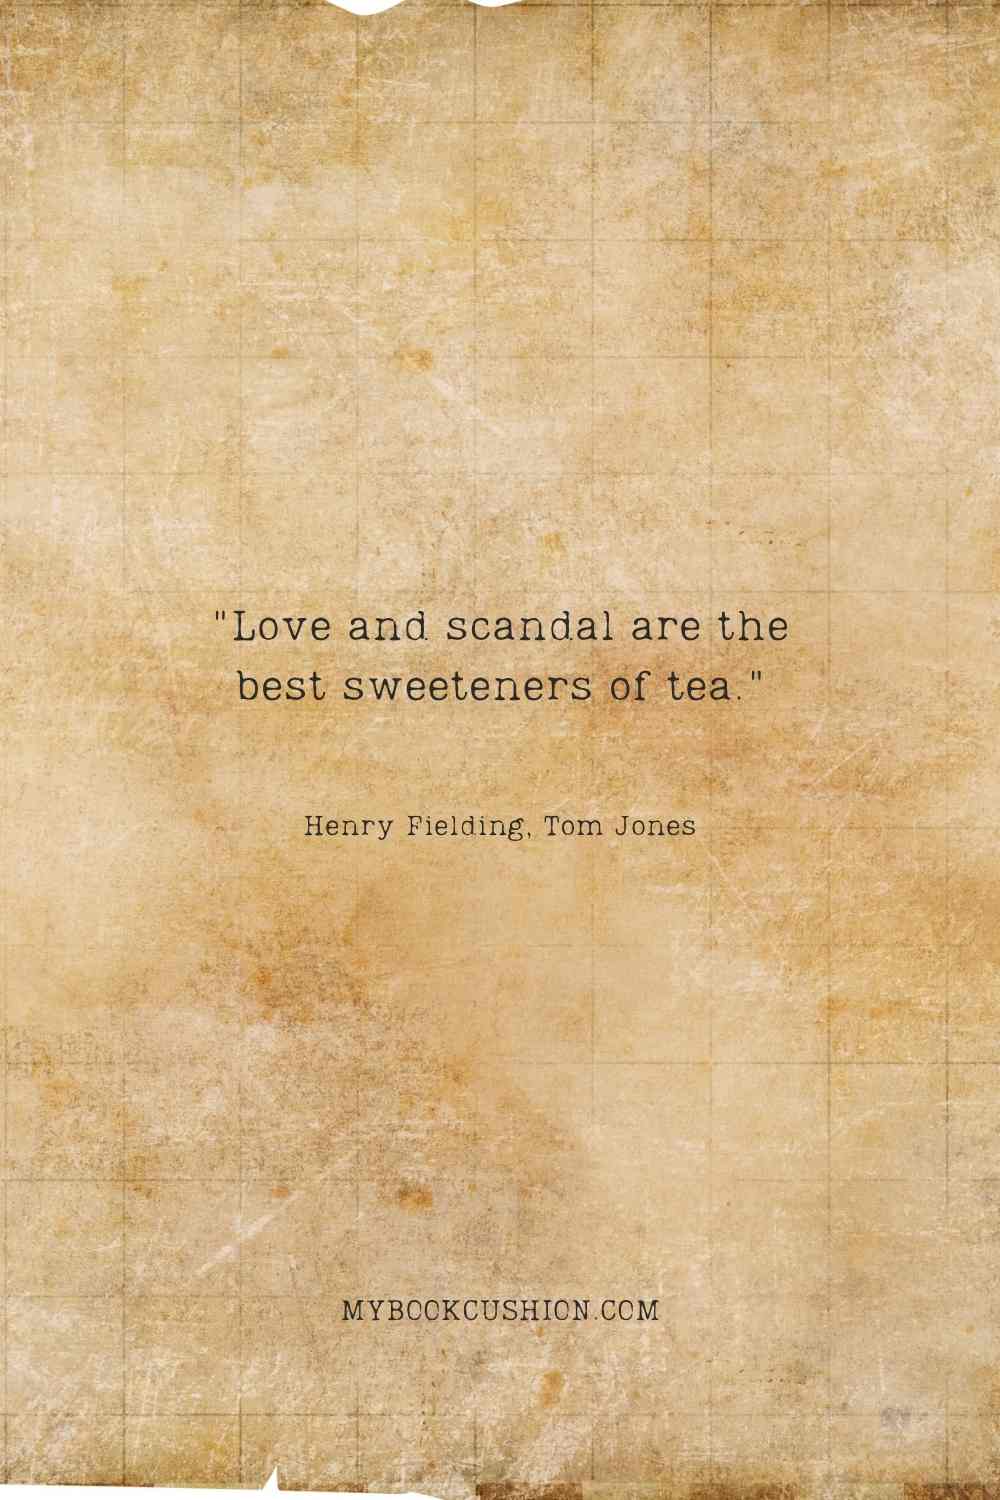 Love and scandal are the best sweeteners of tea. - Henry Fielding, Tom Jones